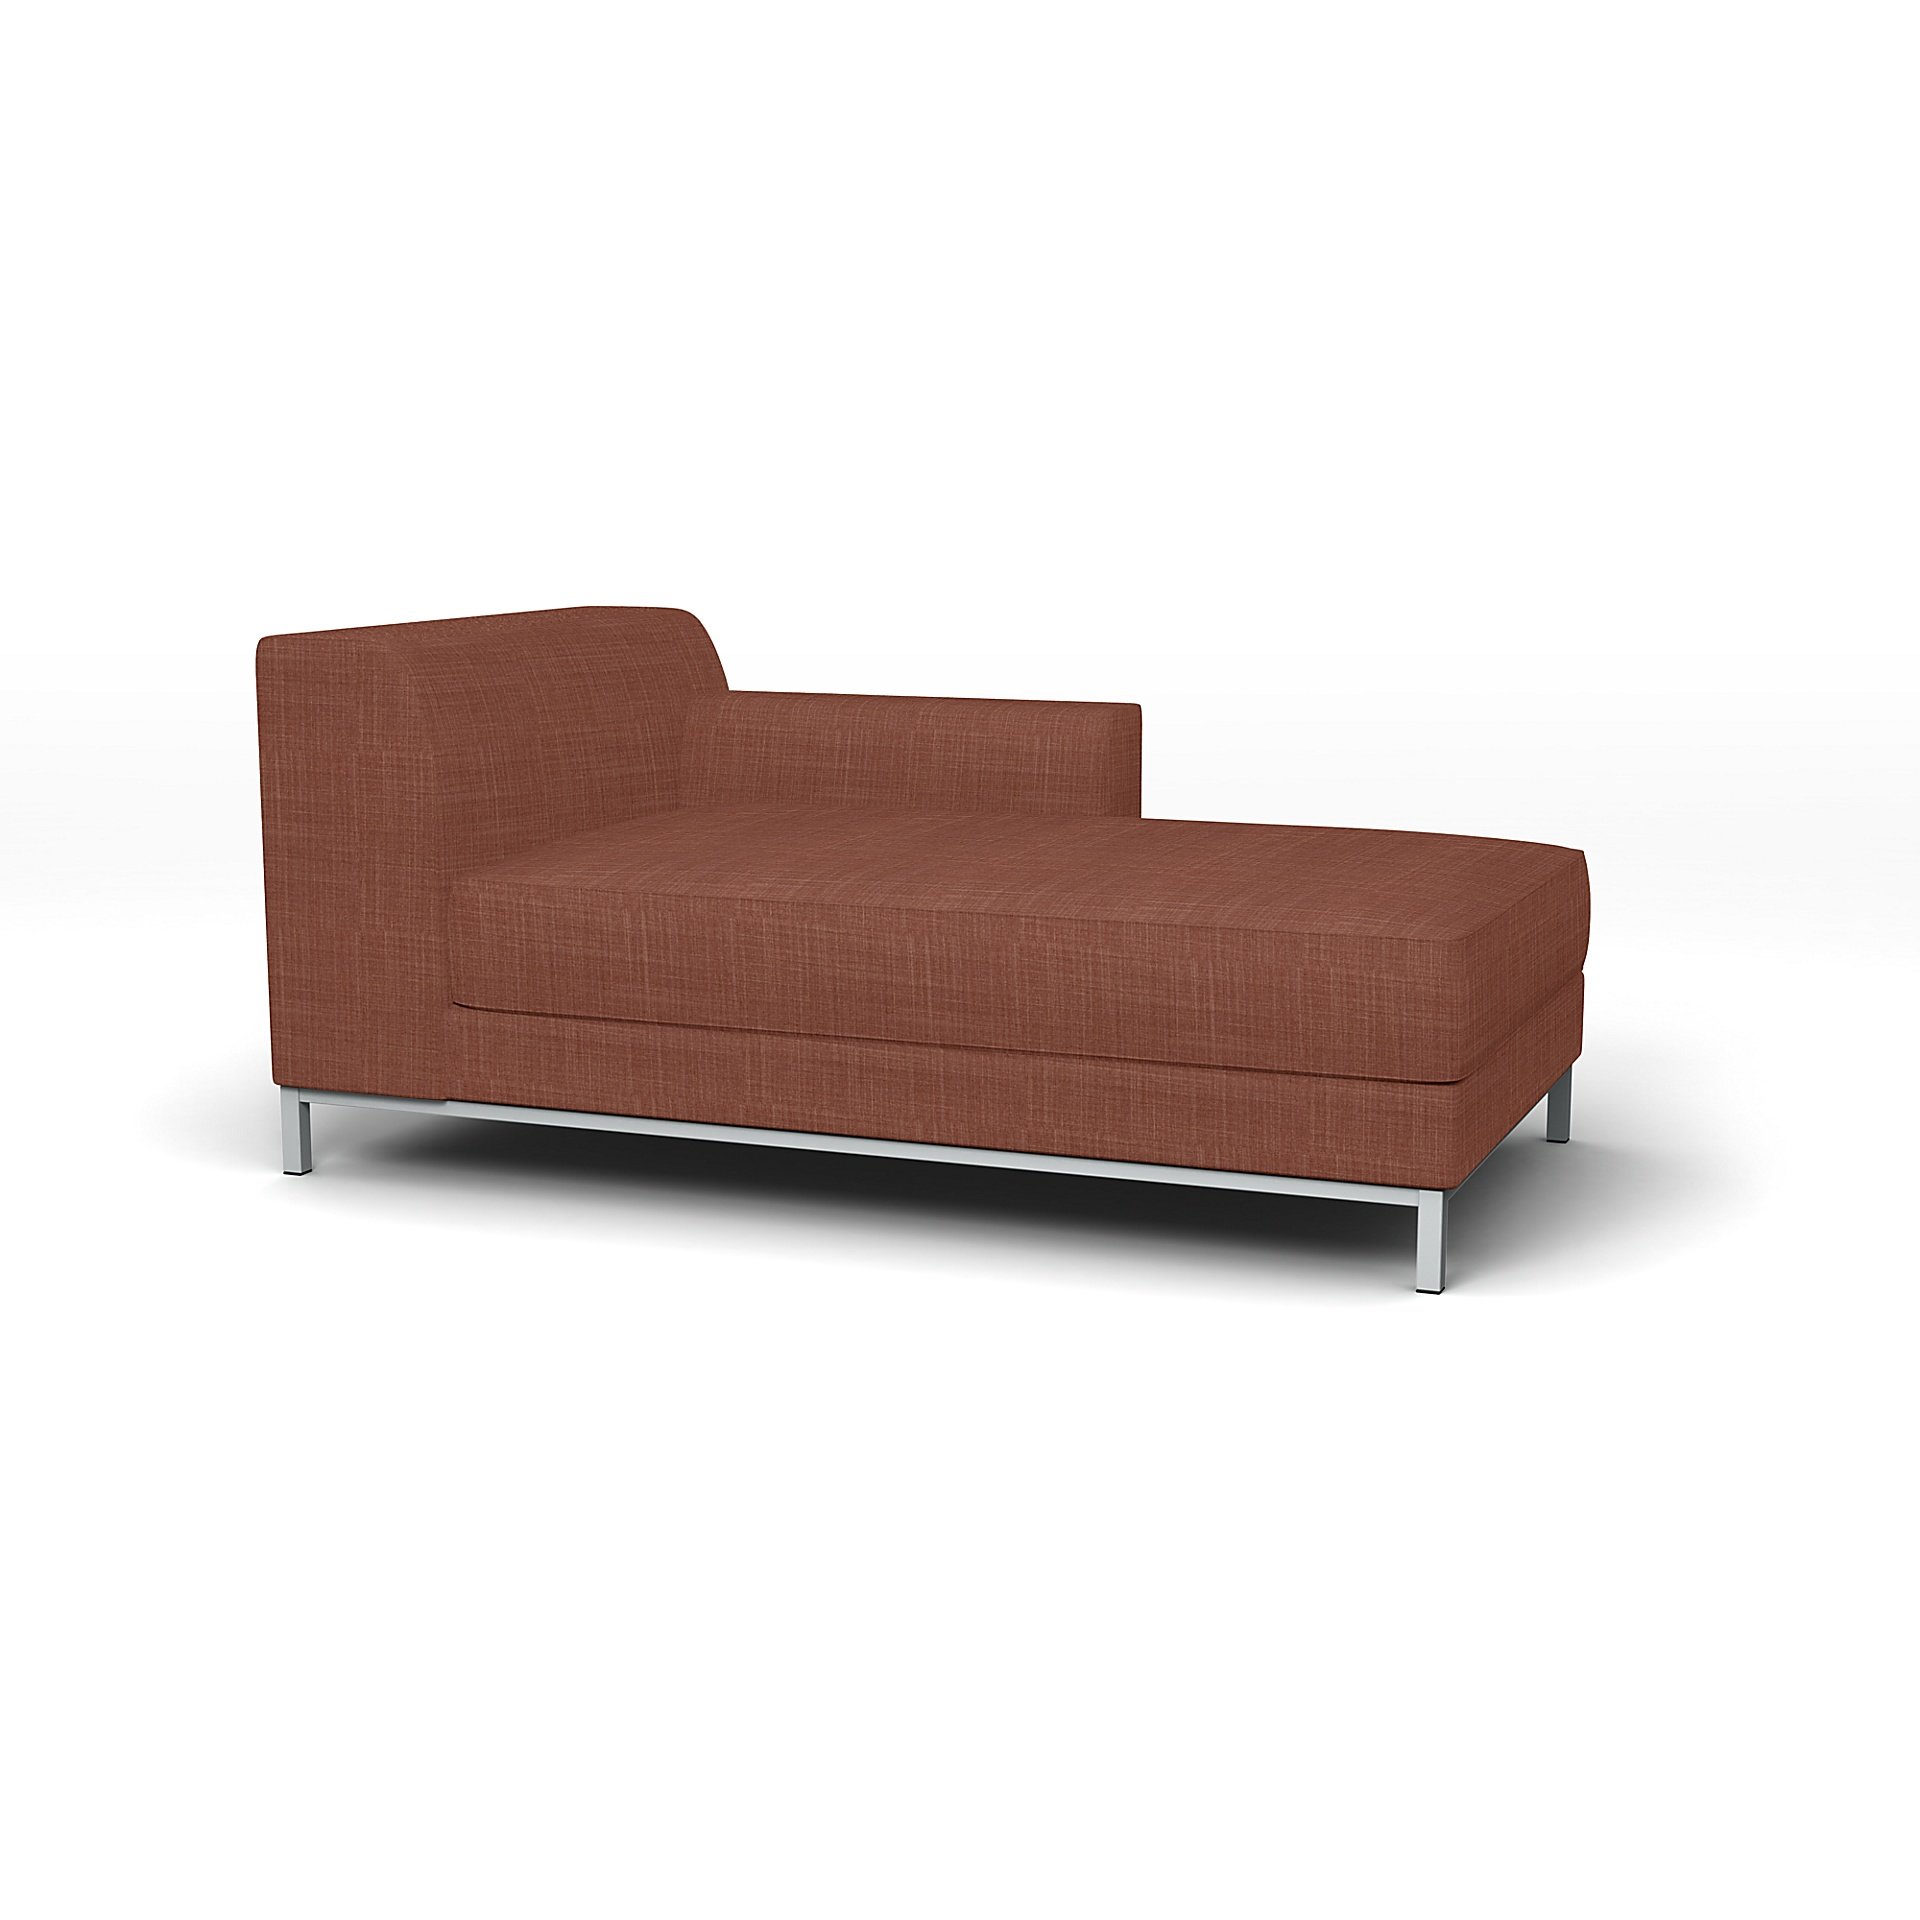 IKEA - Kramfors Chaise Longue with Right Arm Cover, Rust, Boucle & Texture - Bemz